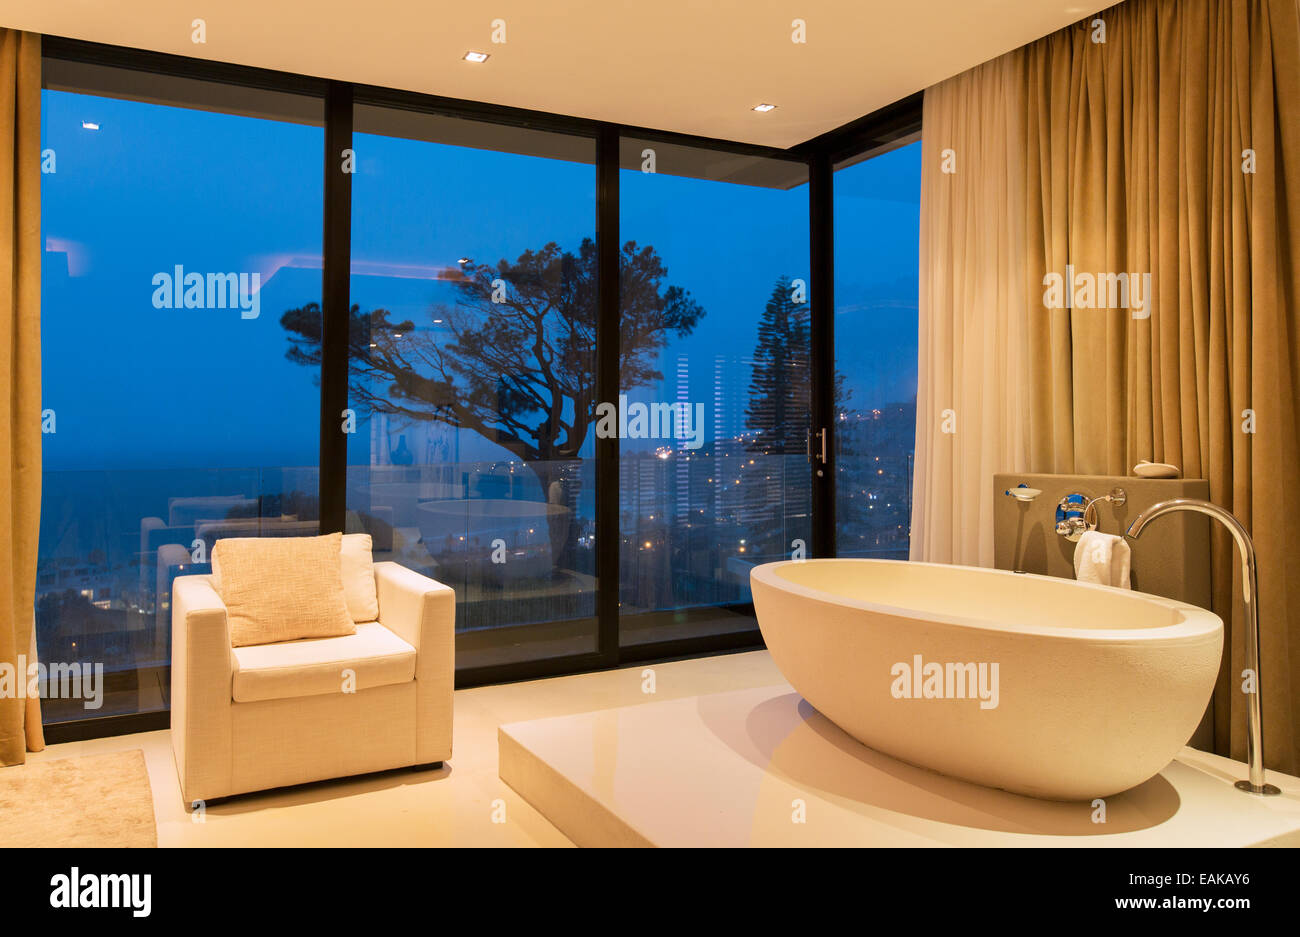 View of luxurious bathroom with bathtub and armchair at night Stock Photo